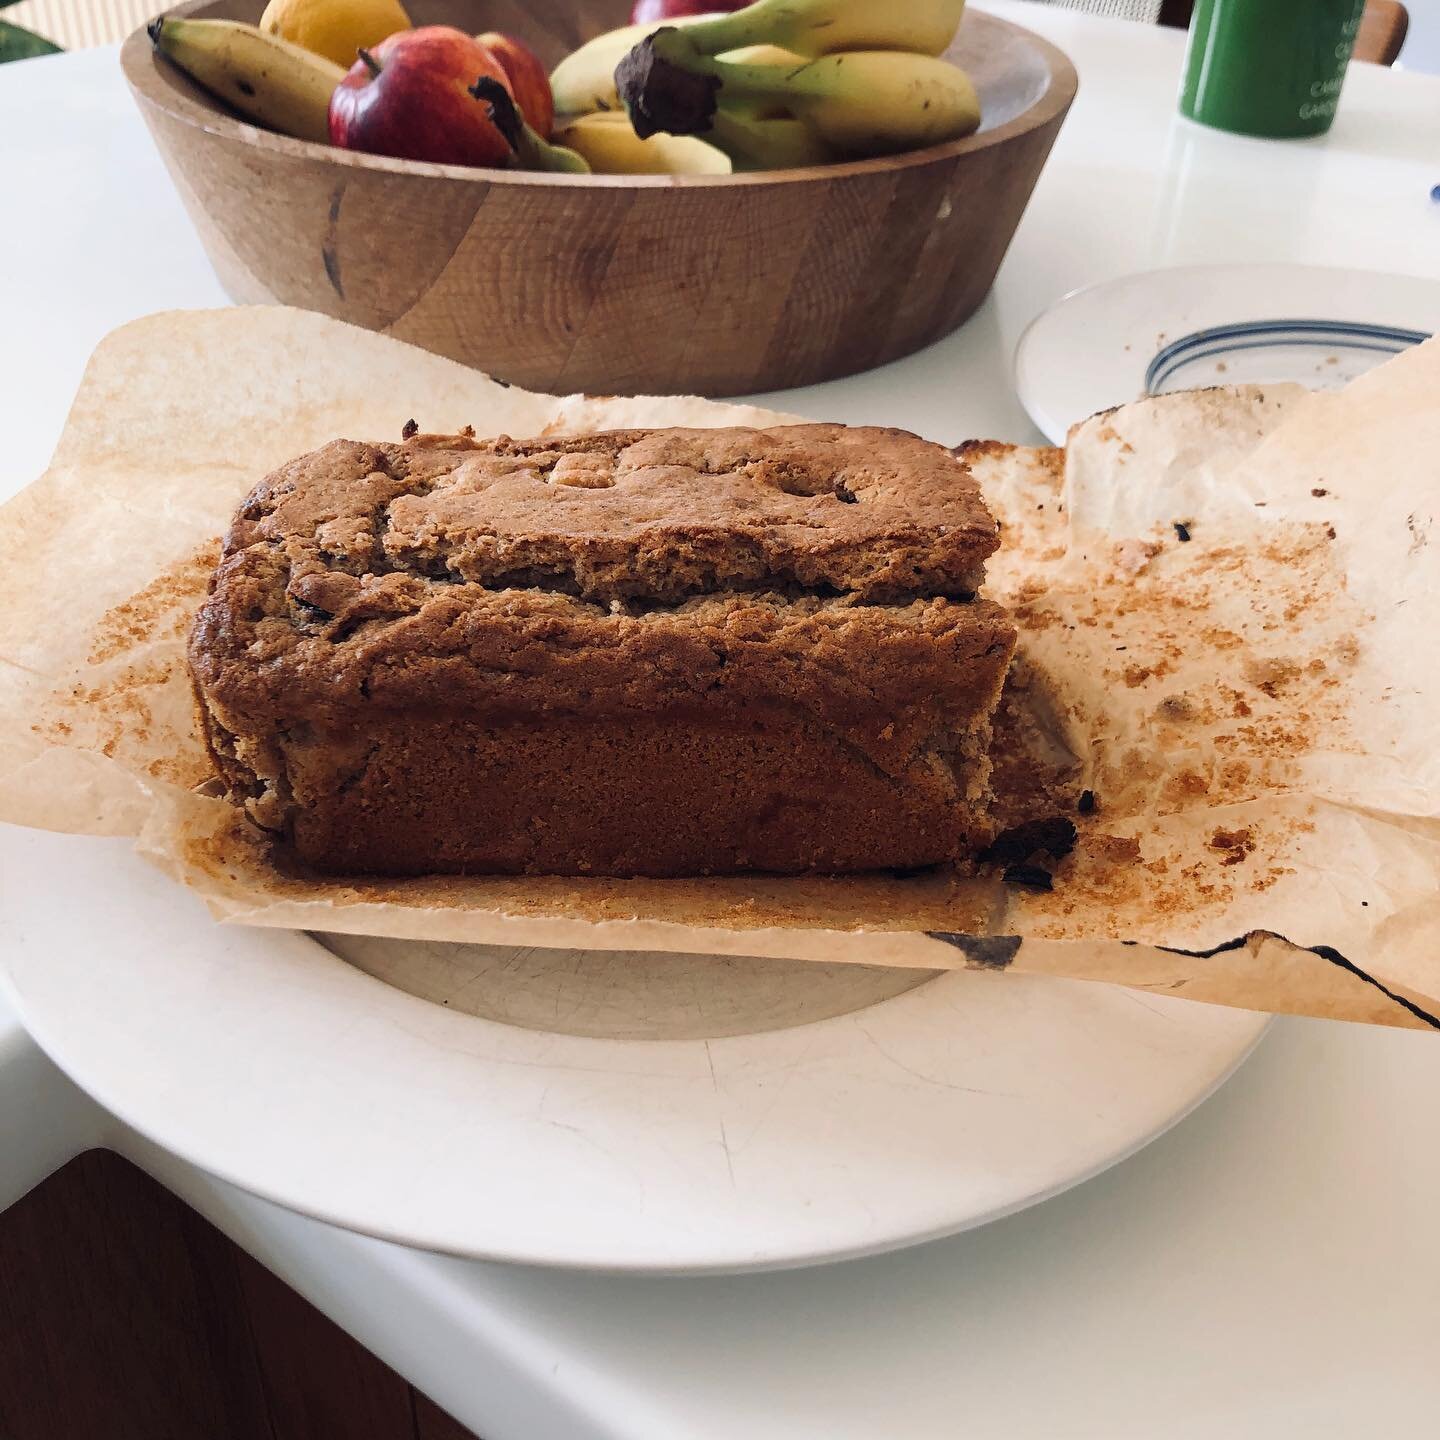 .
#cake
Thank you, thank you @andrewtimothyob for the vegan Apple and Cinnamon loaf/cake recipe.

My intention is to go vegan but cake and tonnes of other non vegan stuff find their way into my mouth😬.

This is tres gorgeous and so sweet due to the 